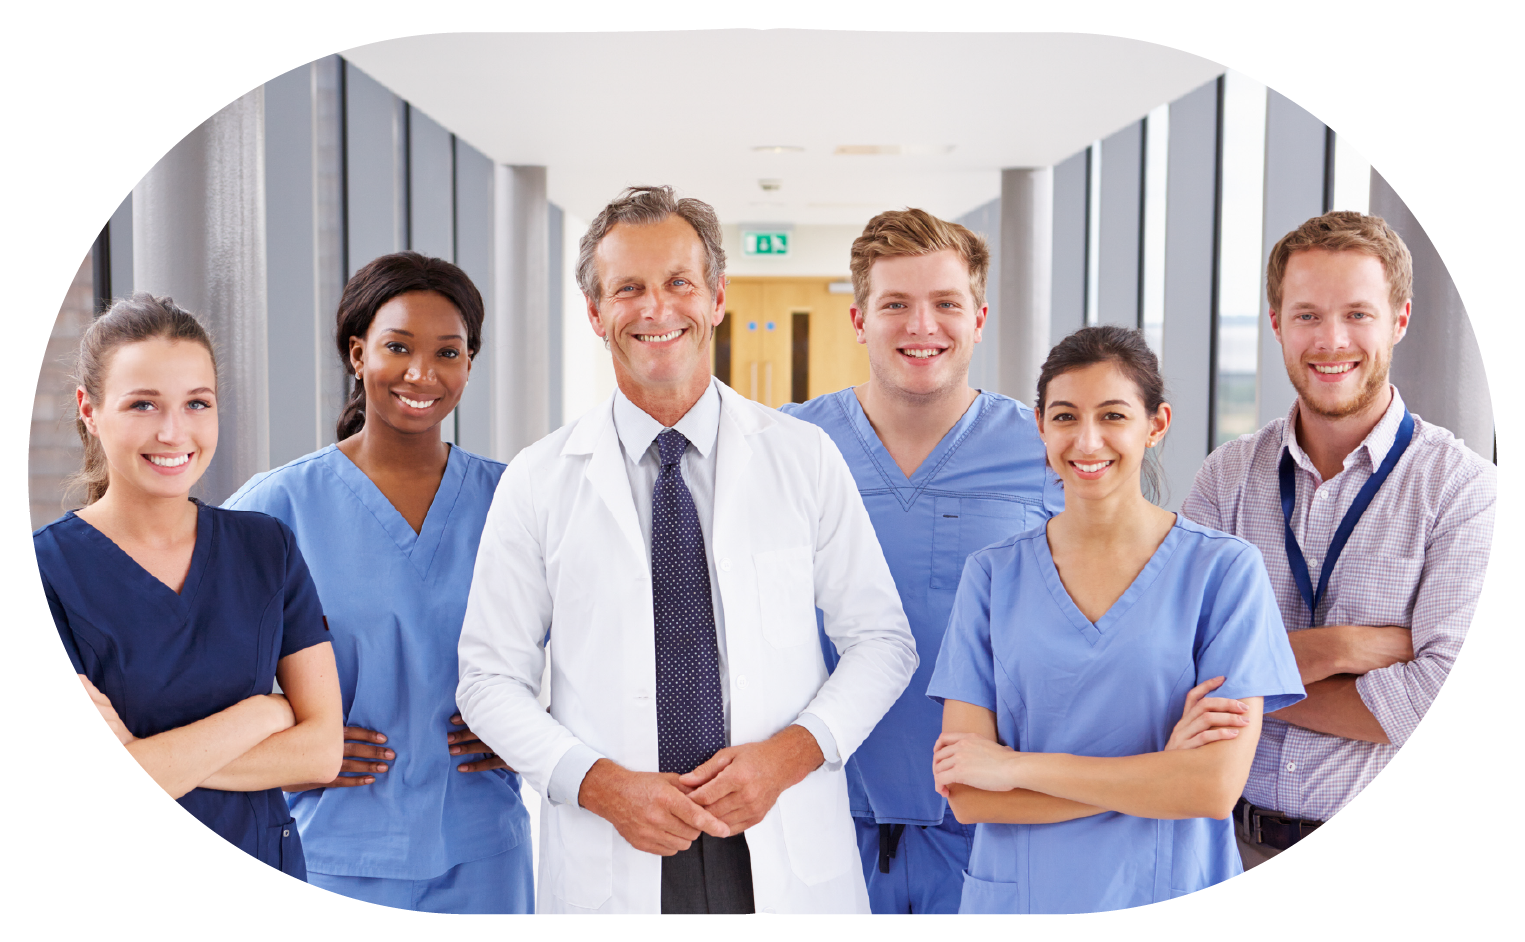 complete your medical training: after completing medical school, you'll need to complete a residency program or other medical training, which is typically required for medical licensure.